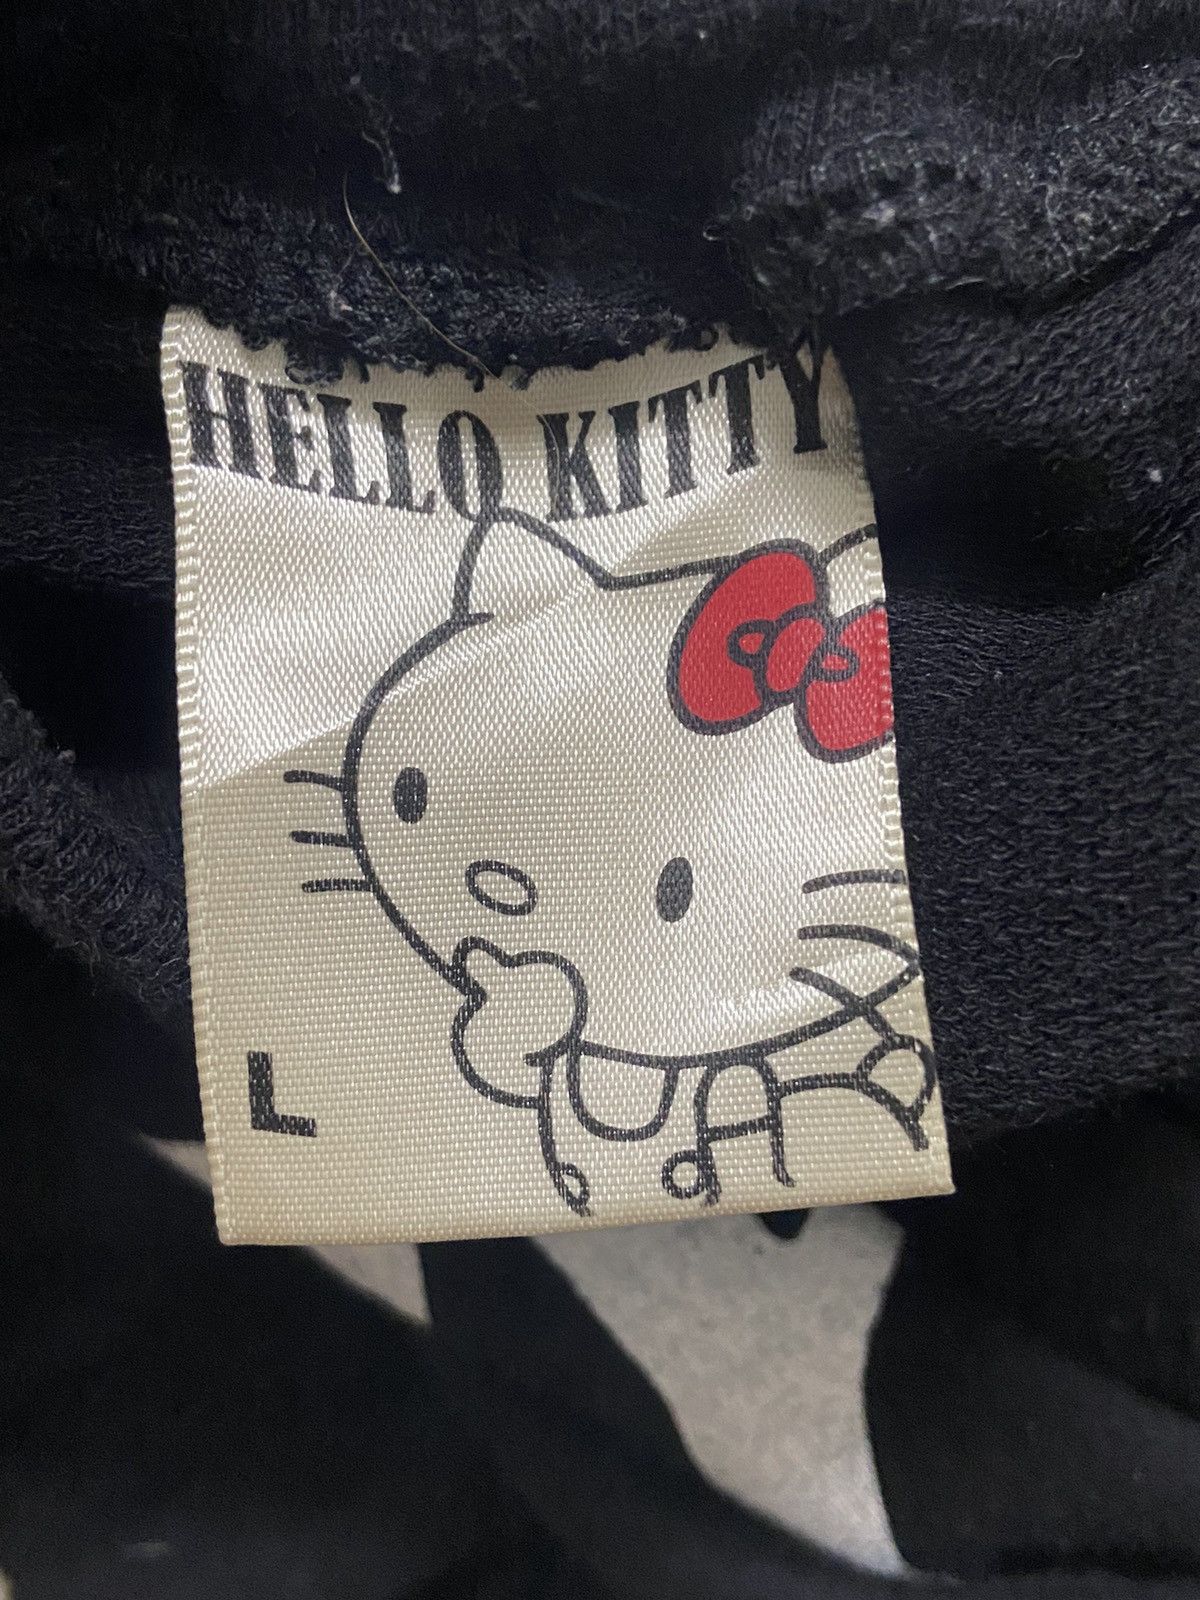 Japanese Brand - Hello Kitty For Sale in Japan Only Shorts - 3